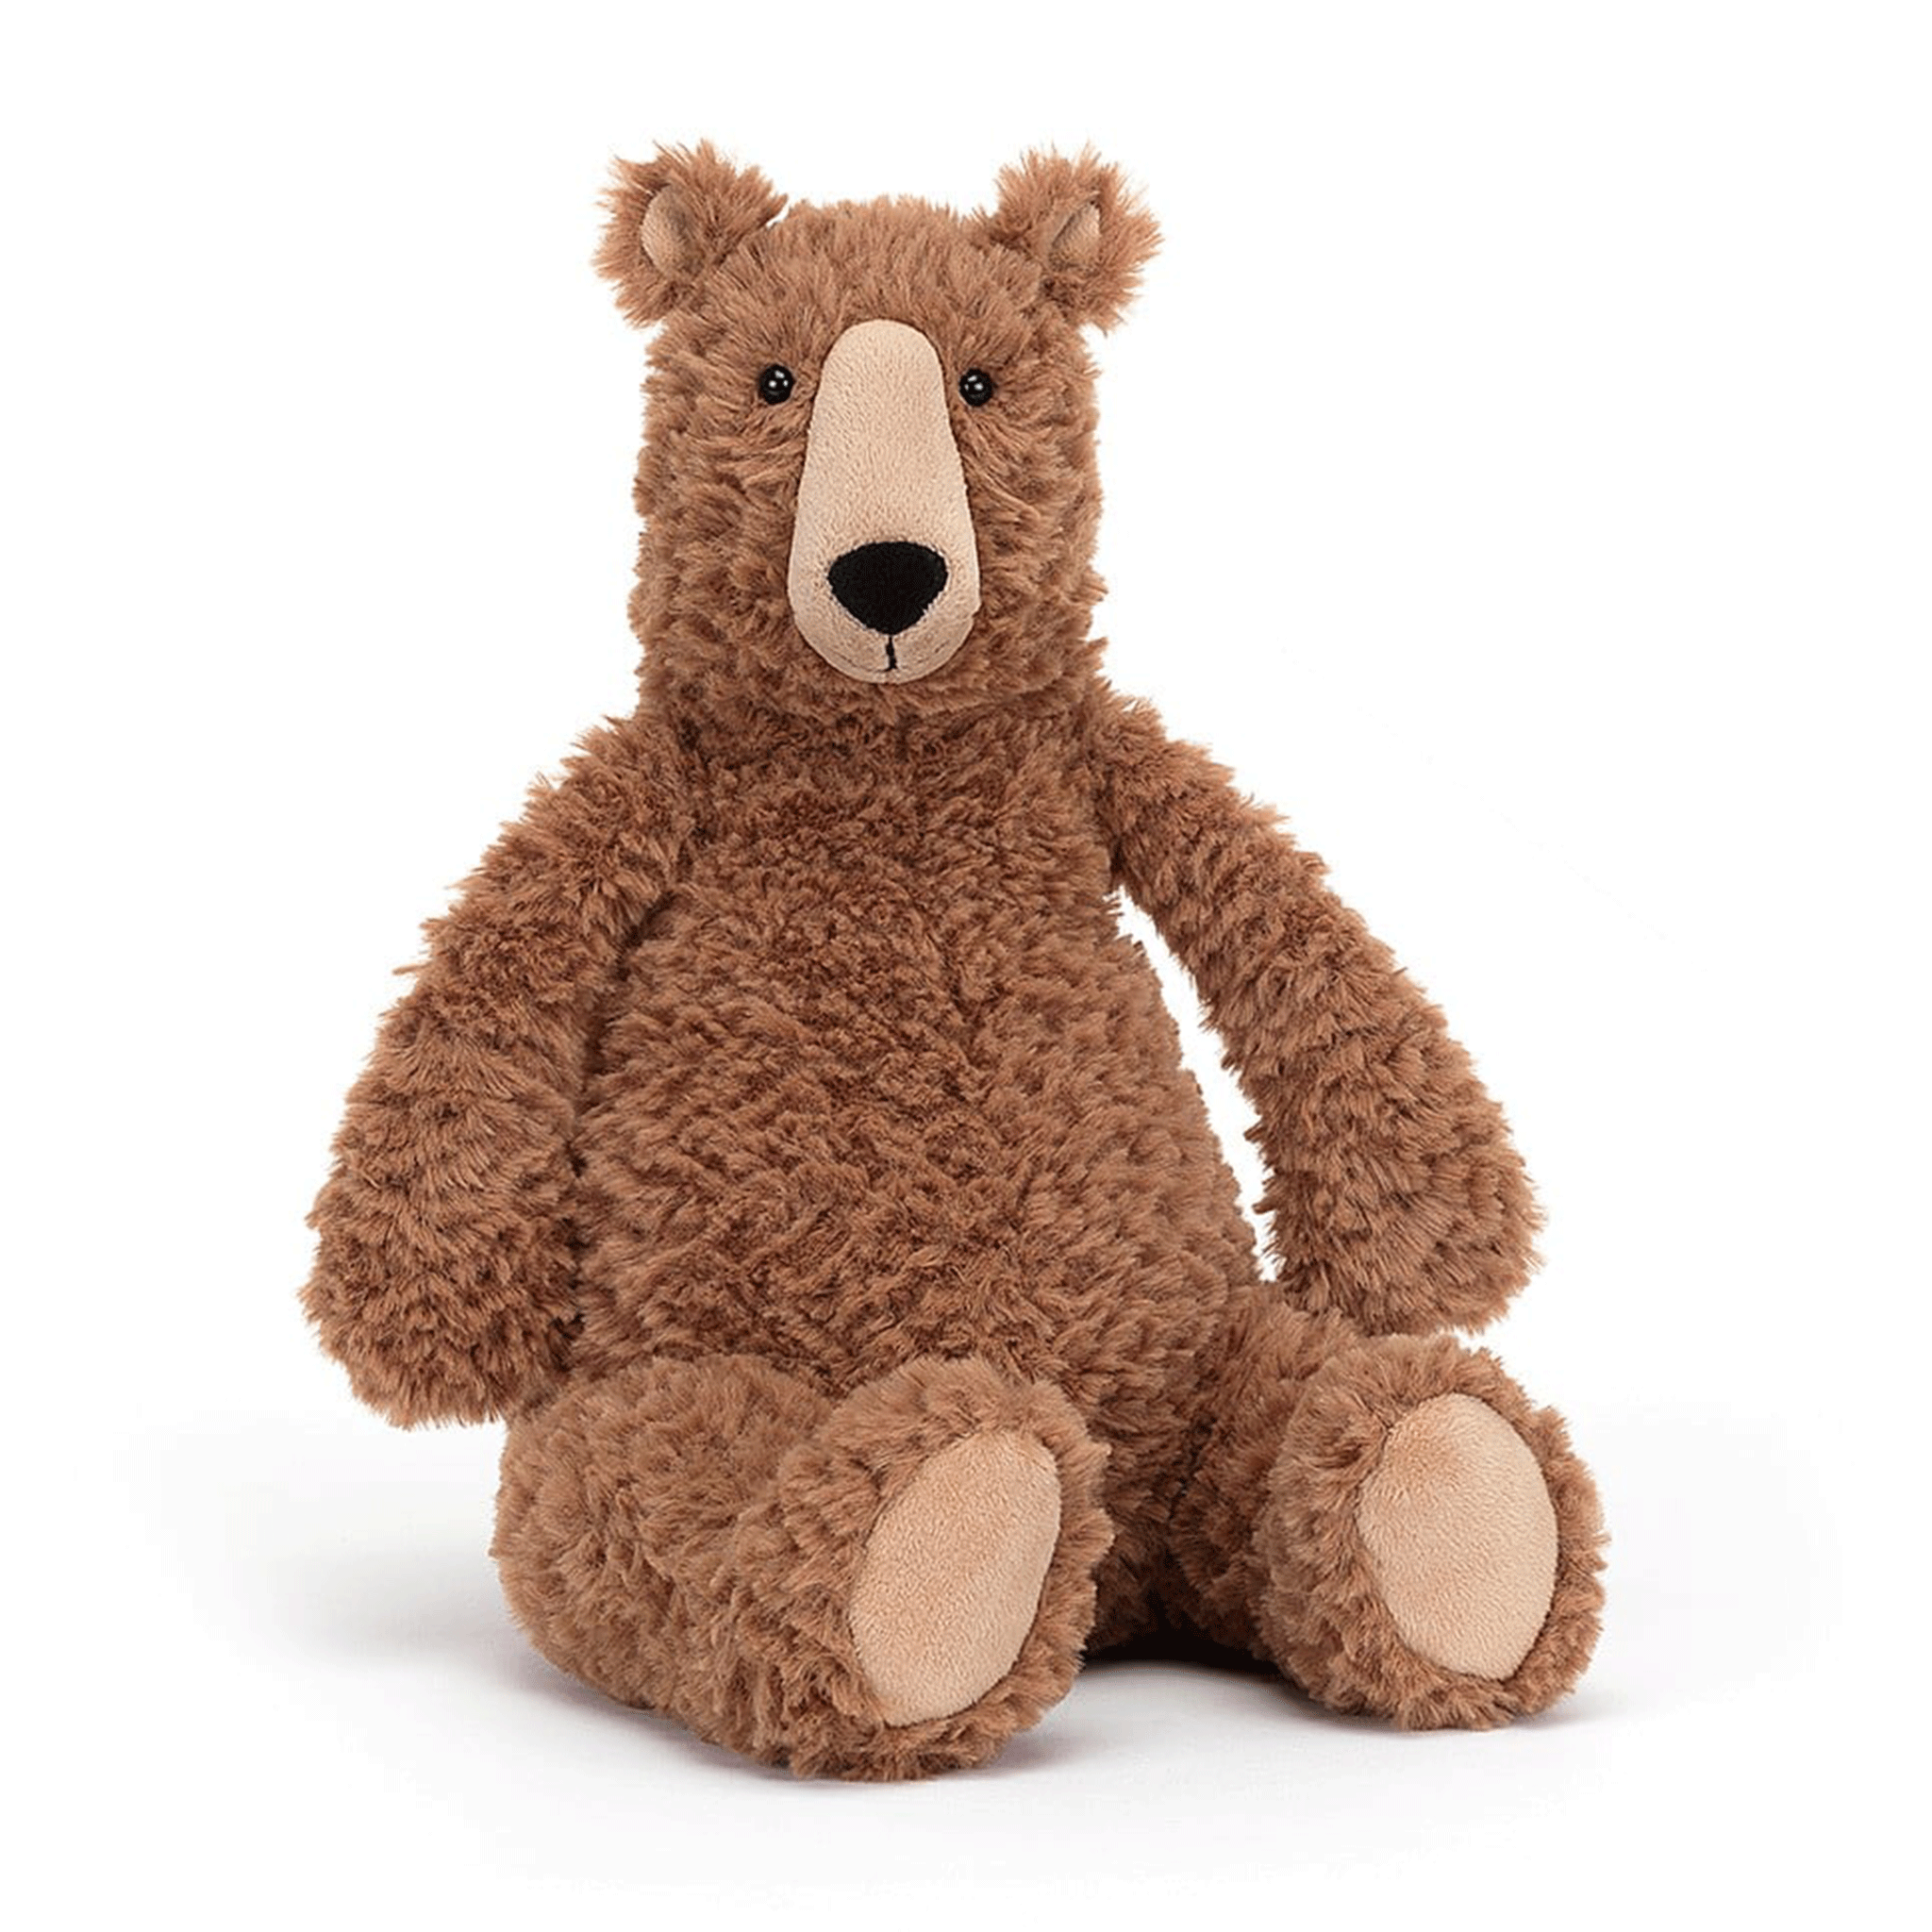 On a white background is a cuddly brown bear stuffed toy. 